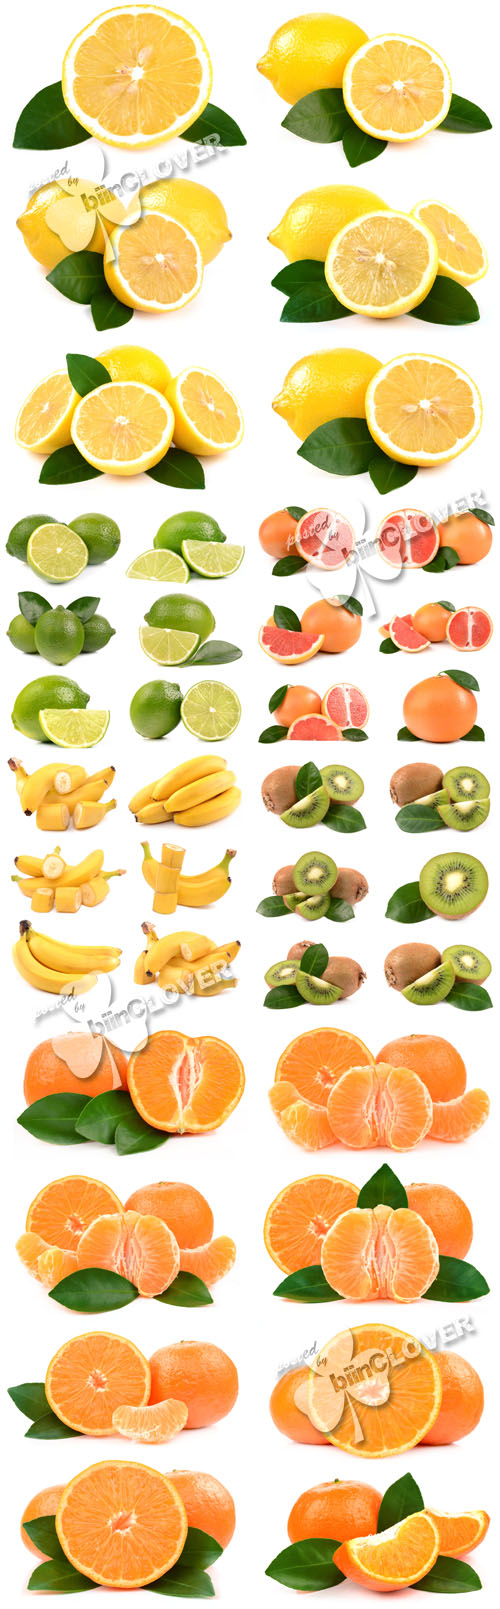 Fruits and citrus 0440